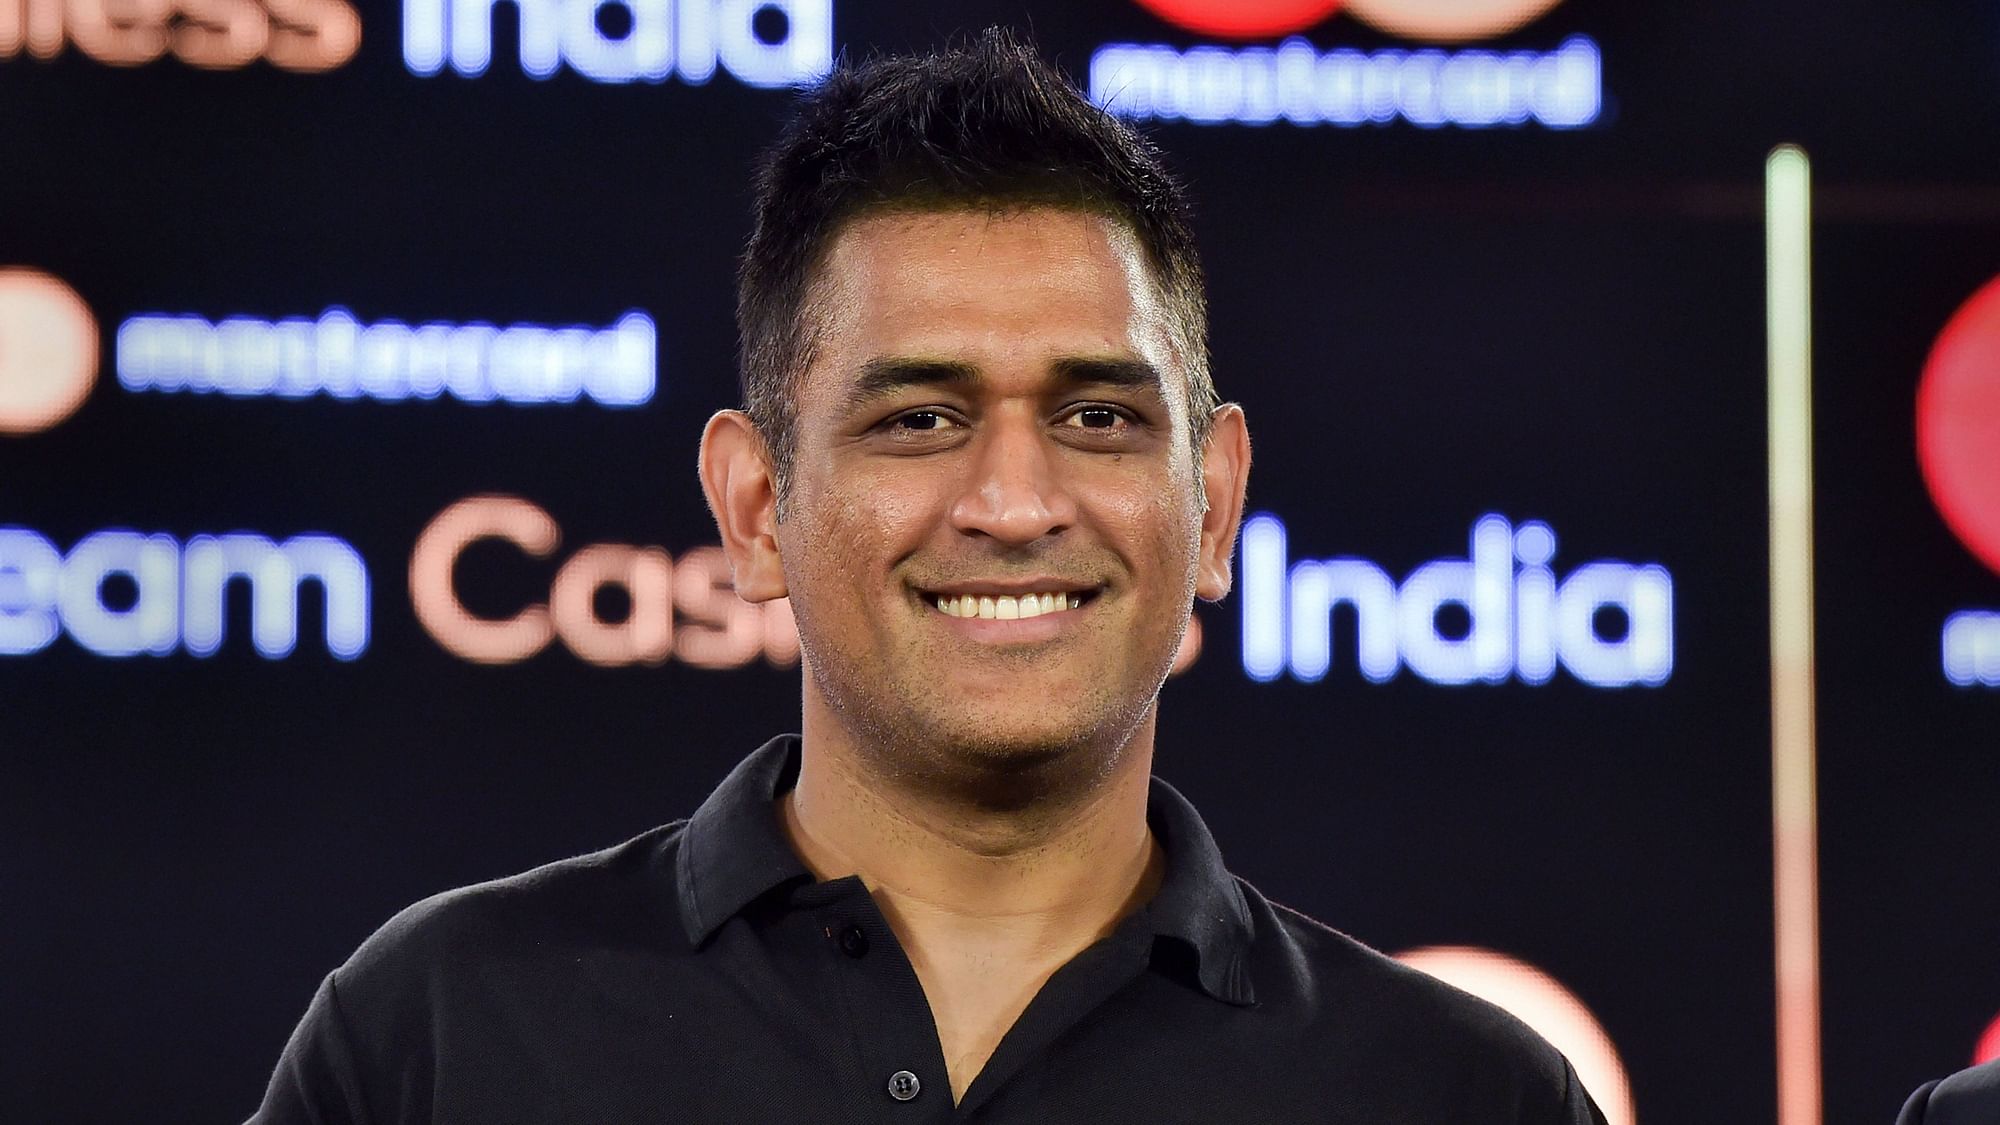 MS Dhoni has been on a sabbatical since India’s semifinal exit from the World Cup in July.